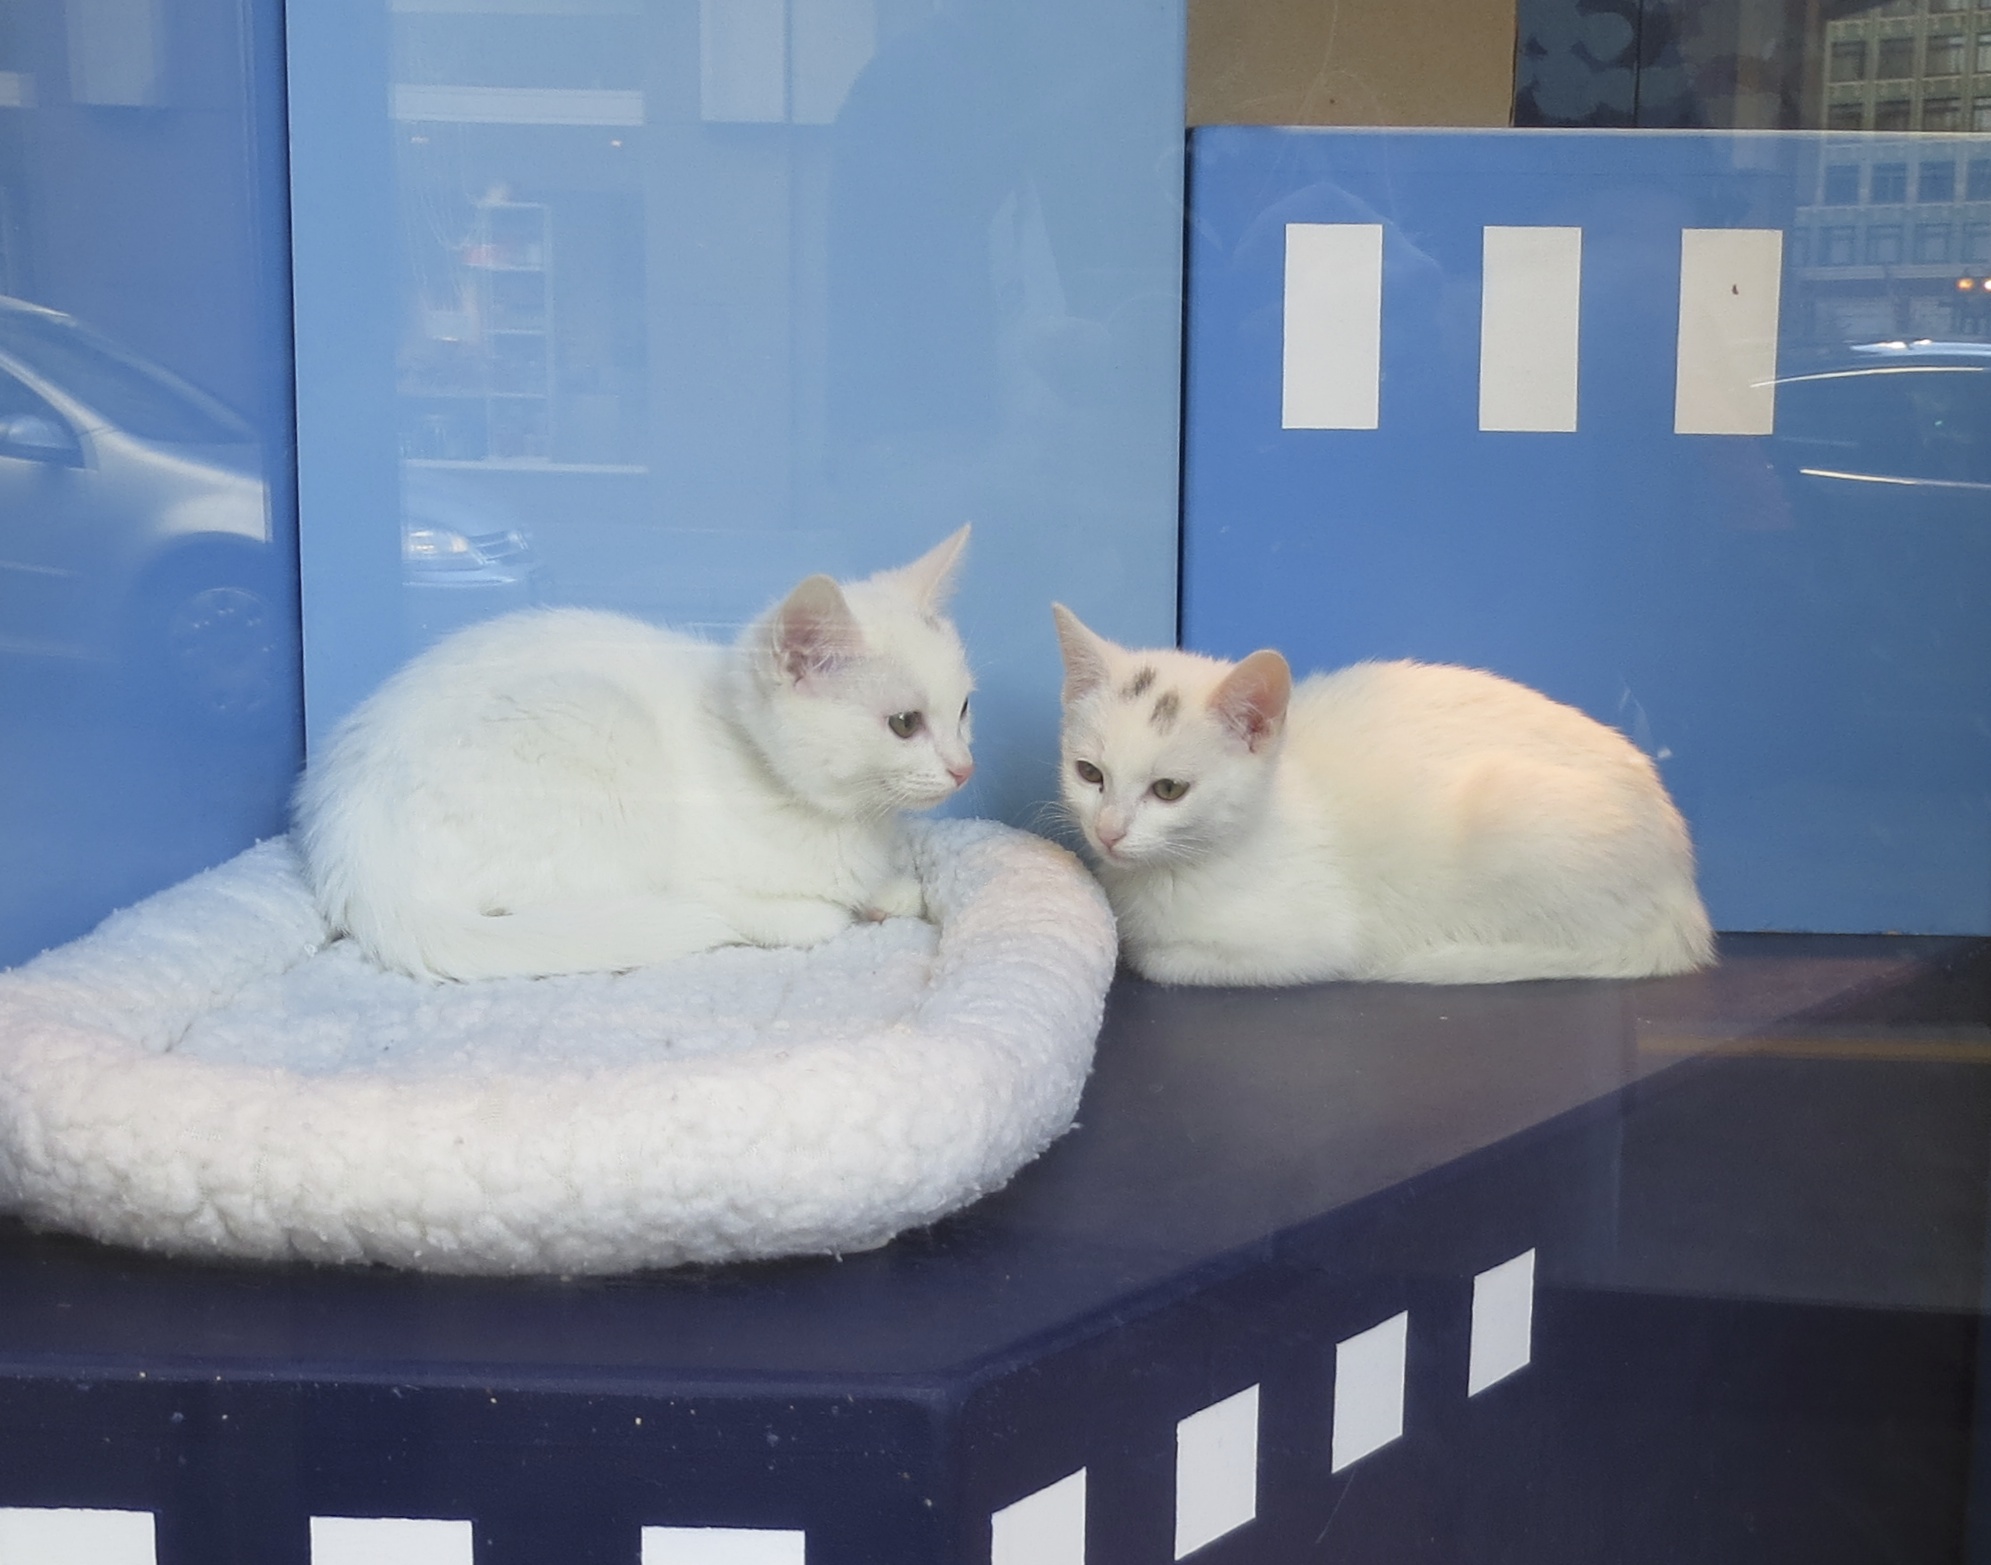 Two White Cats with Black Marks on Their Heads